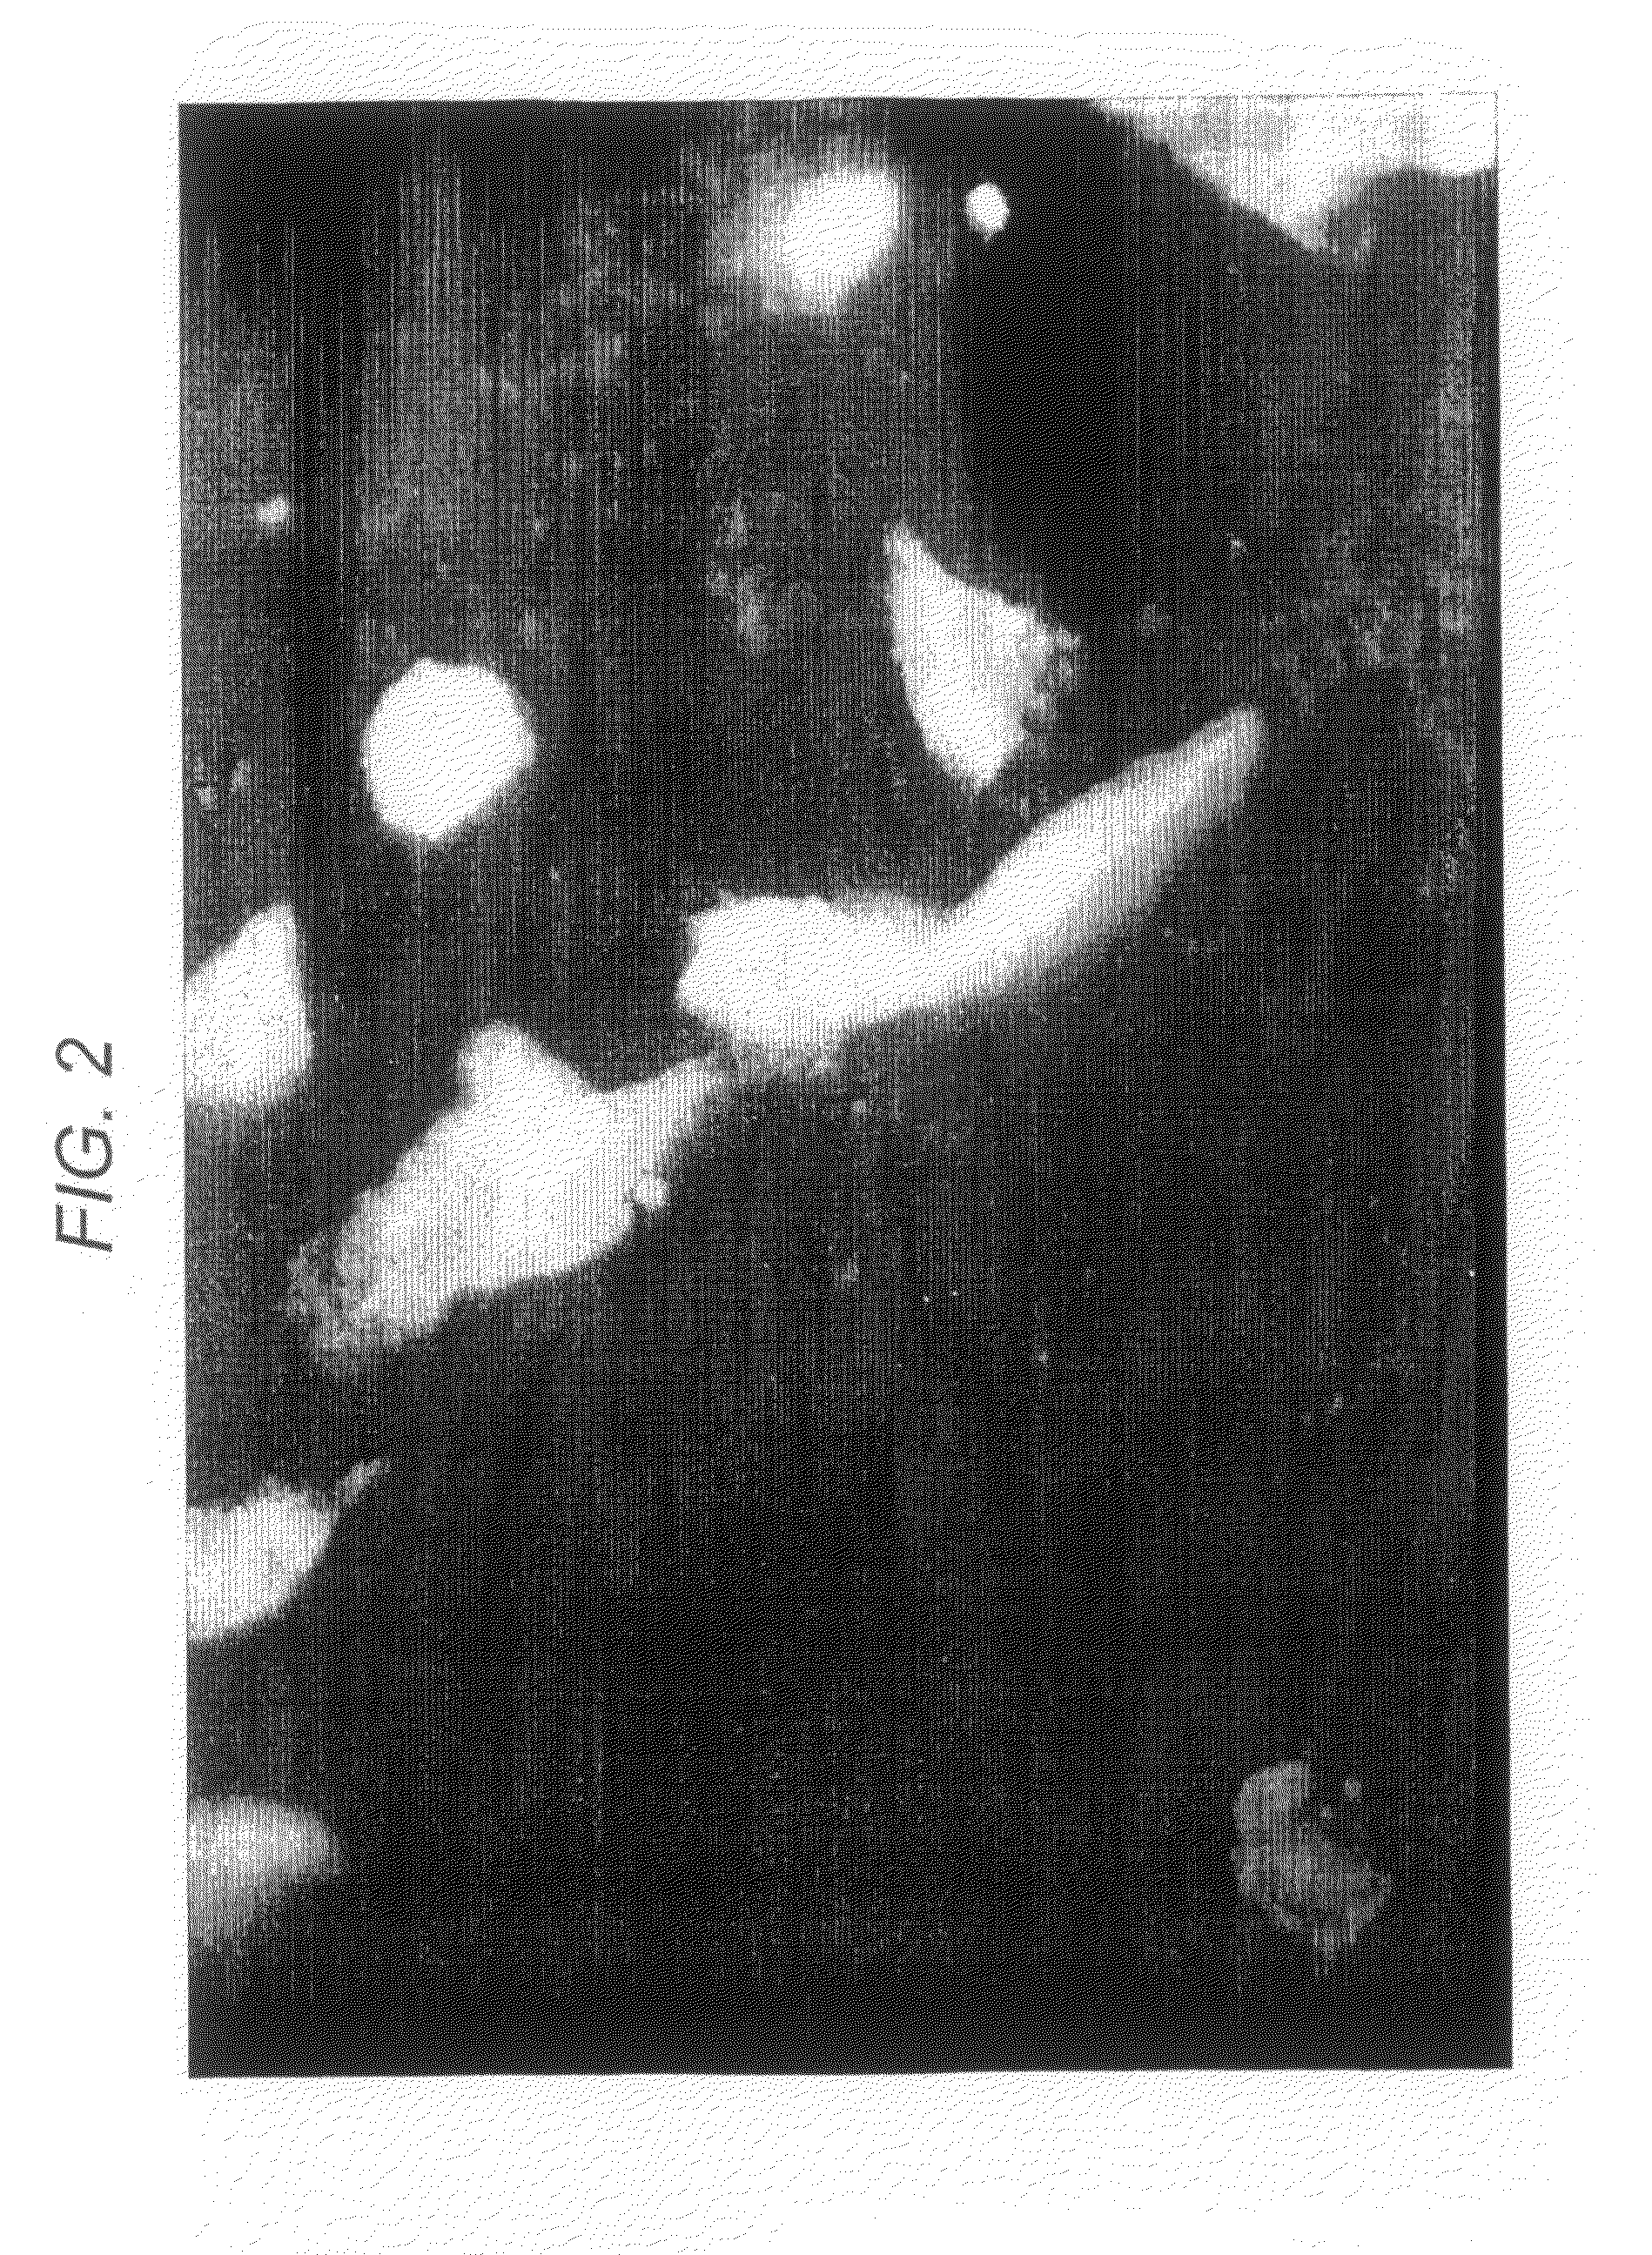 Peptides for Treatment and Diagnosis of Autoimmune Disease